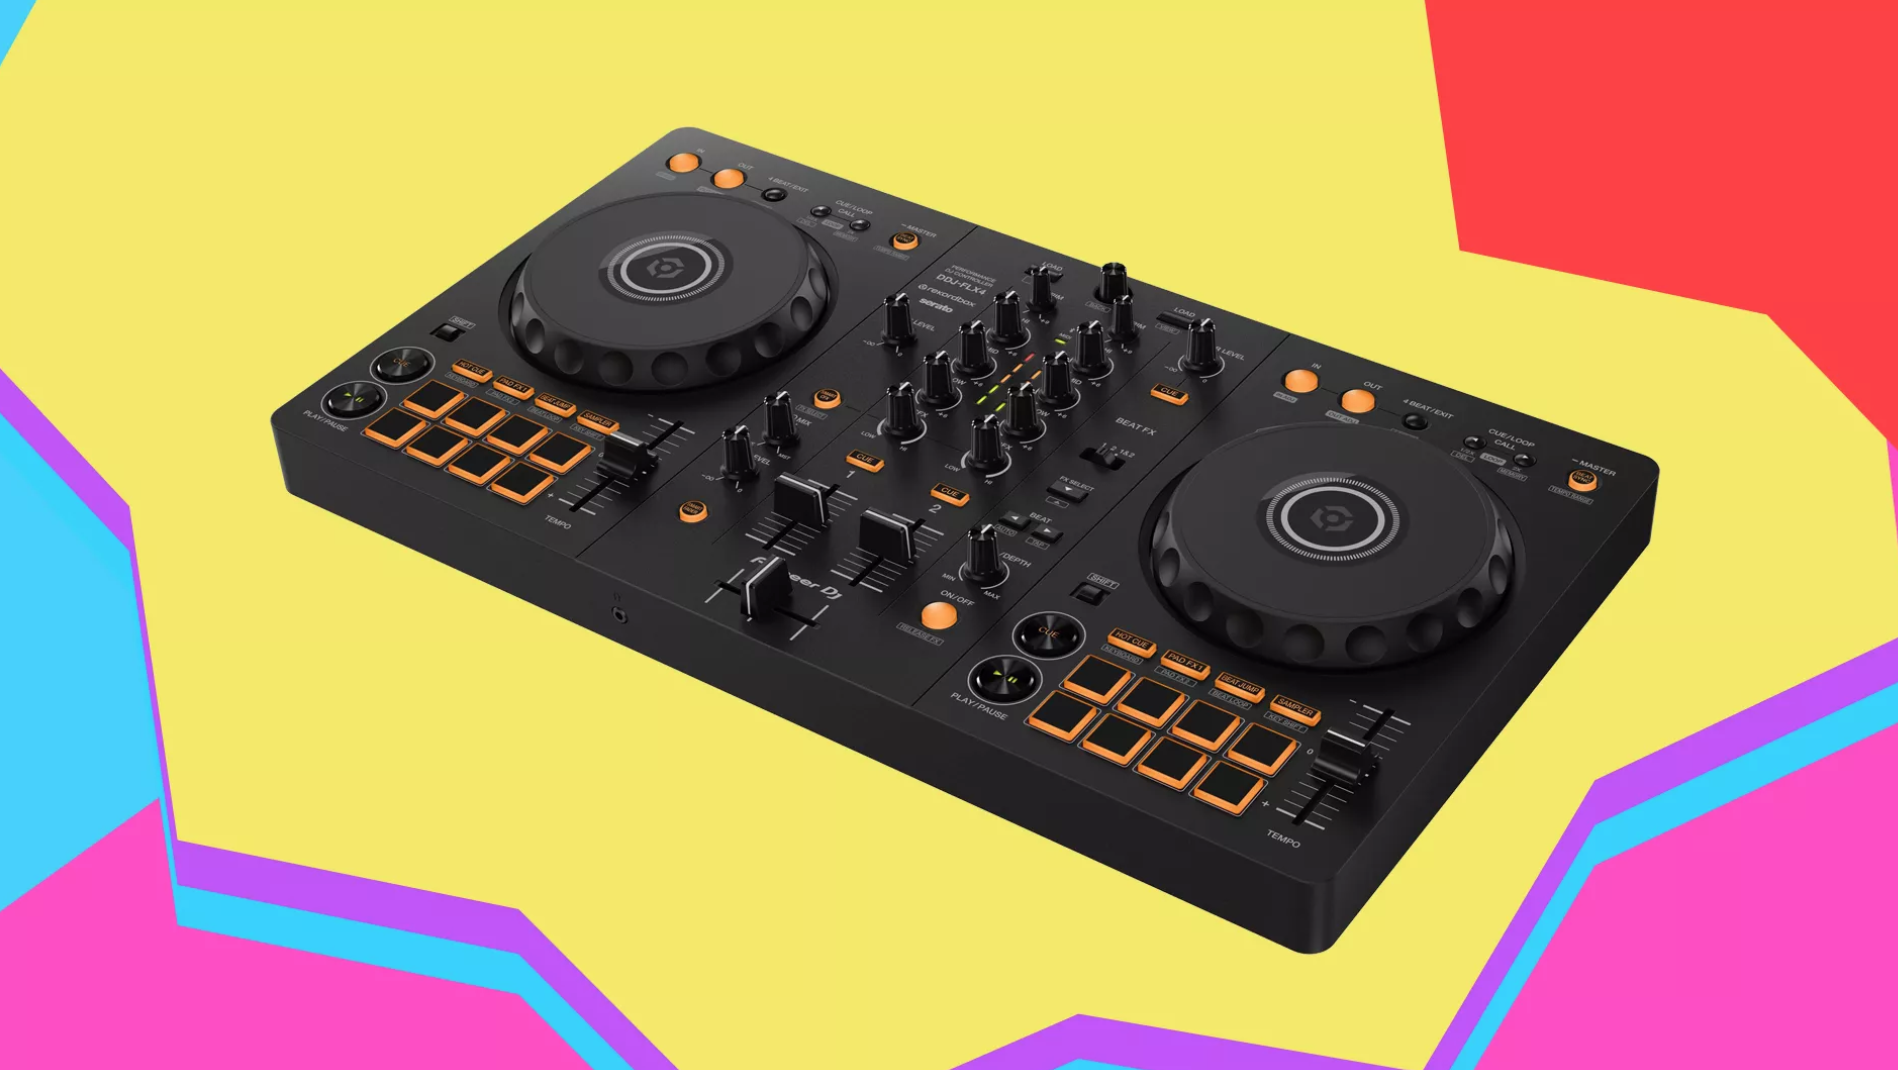 Pioneer’s new DDJ-FLX4 DJ controller is the perfect Christmas gift for budding DJs